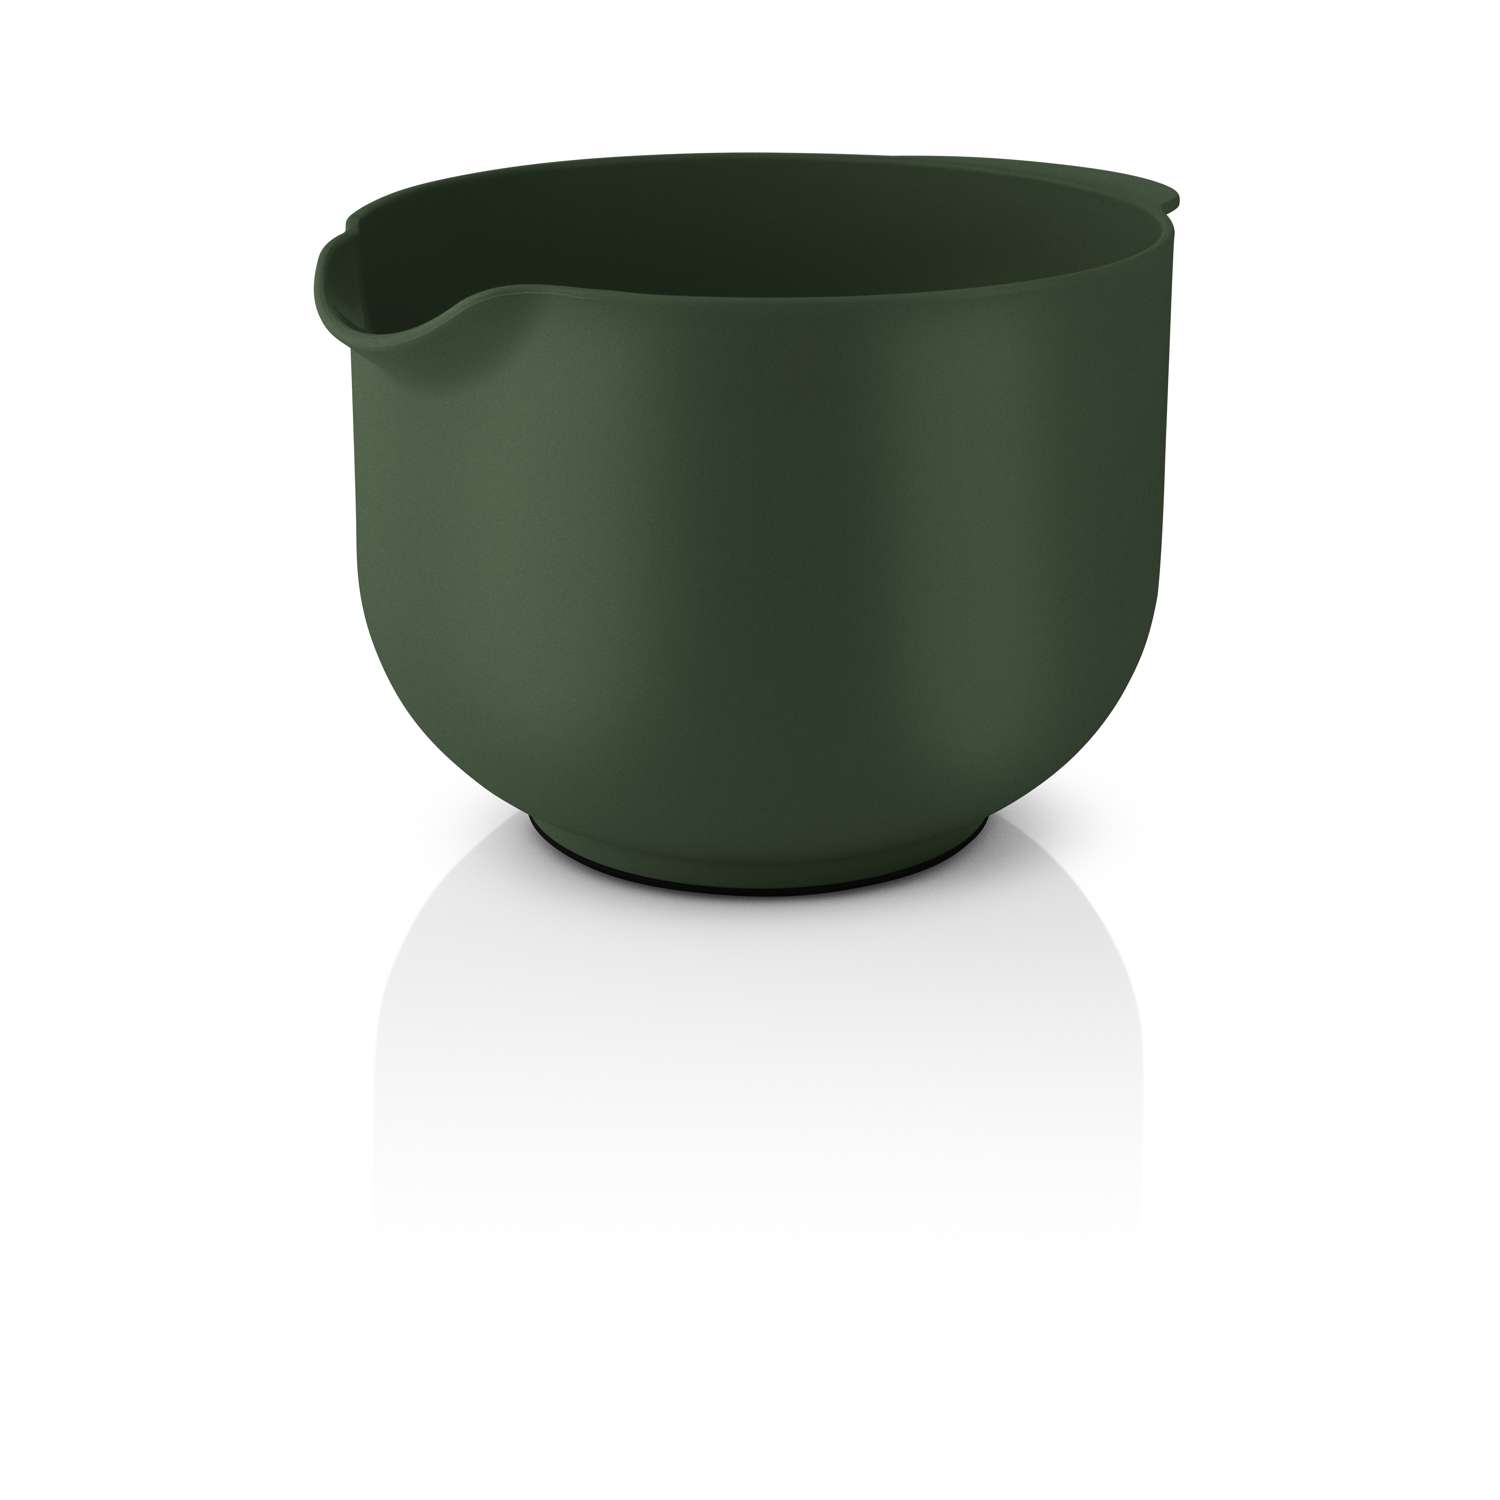 https://www.evasolo.com/%2FFiles%2FImages%2FPlytix%2FProduct_Photo_1%2F530423__Eva_mixing_bowl_2l_angle_Emerald_Green_aRGB_High.jpg